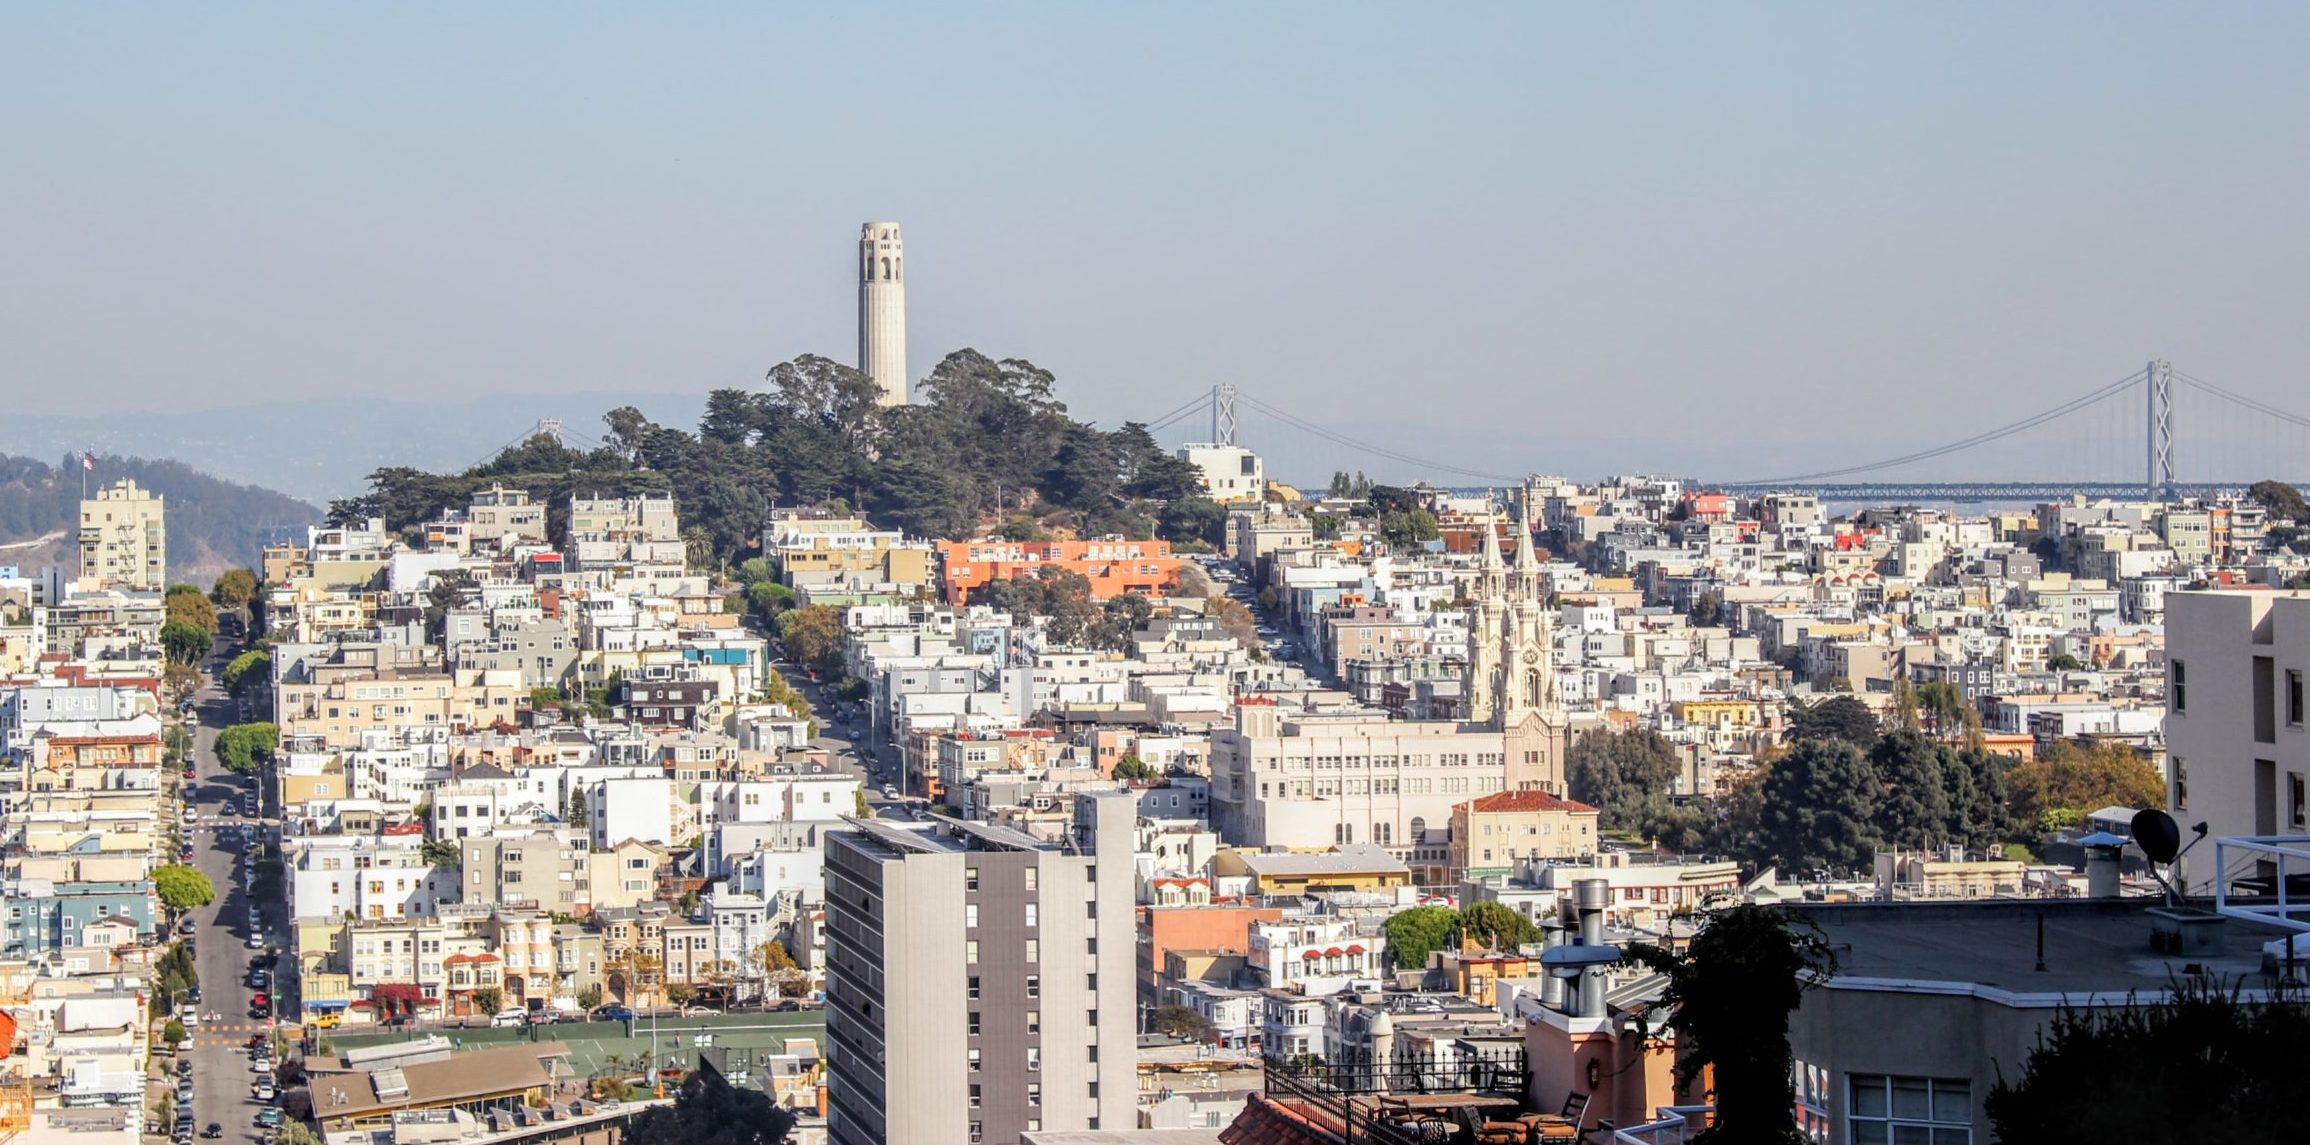 Coit Tower on top of Telegraph Hill 